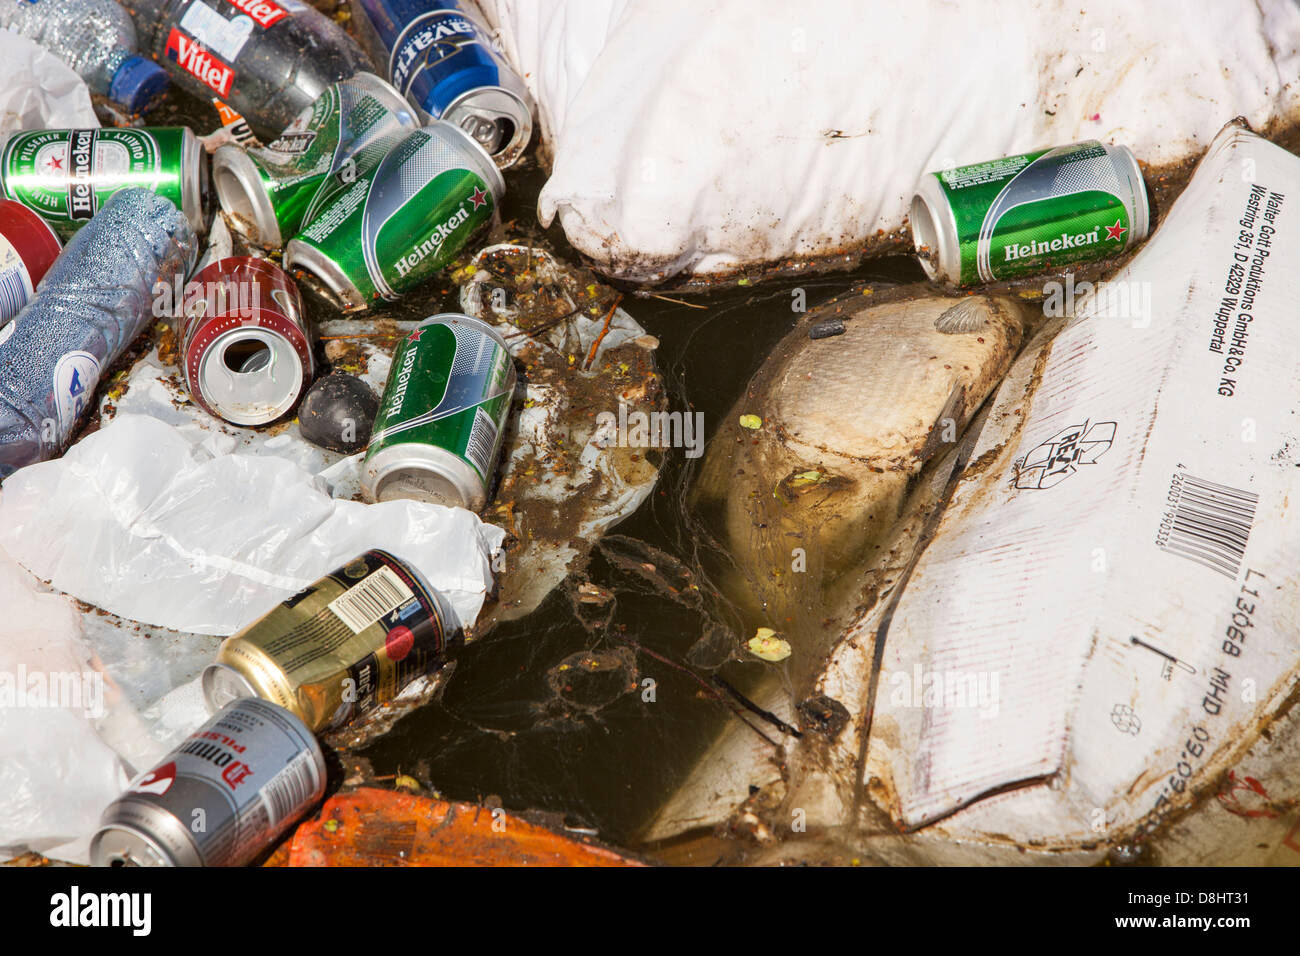 Rubbish up against a litter trap on a canal in Amsterdam, Netherlands. Stock Photo